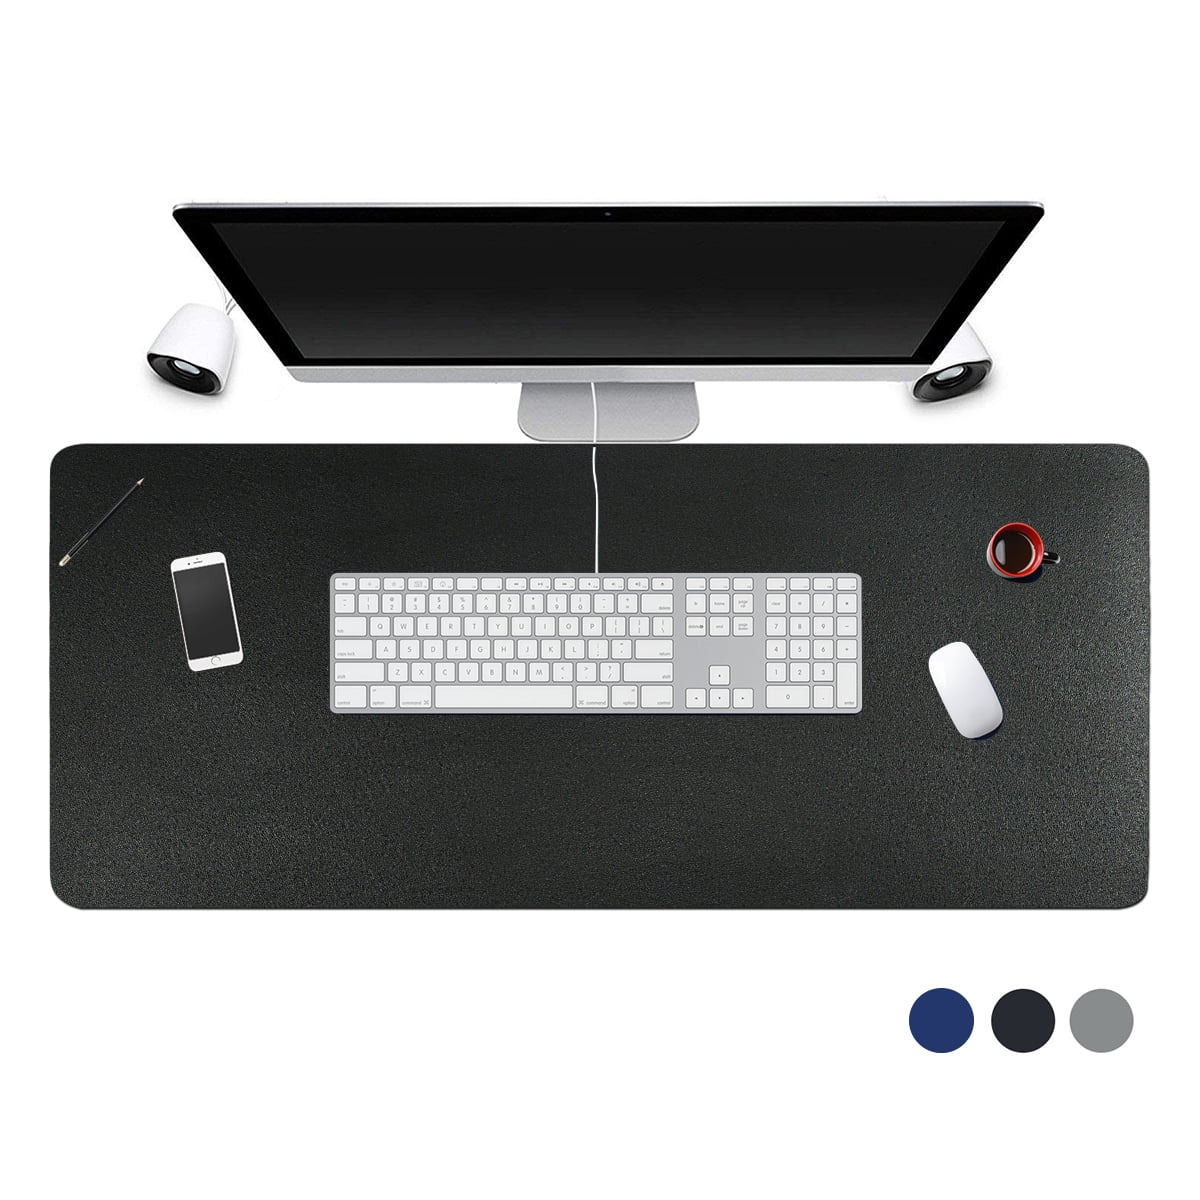 Large Desk mat & PU Leather,Mouse pad,Non-Slip Office Leather Desk Mat,Waterproof  Desk Writing Pad for Office/Home，36 inches x 20 inches 